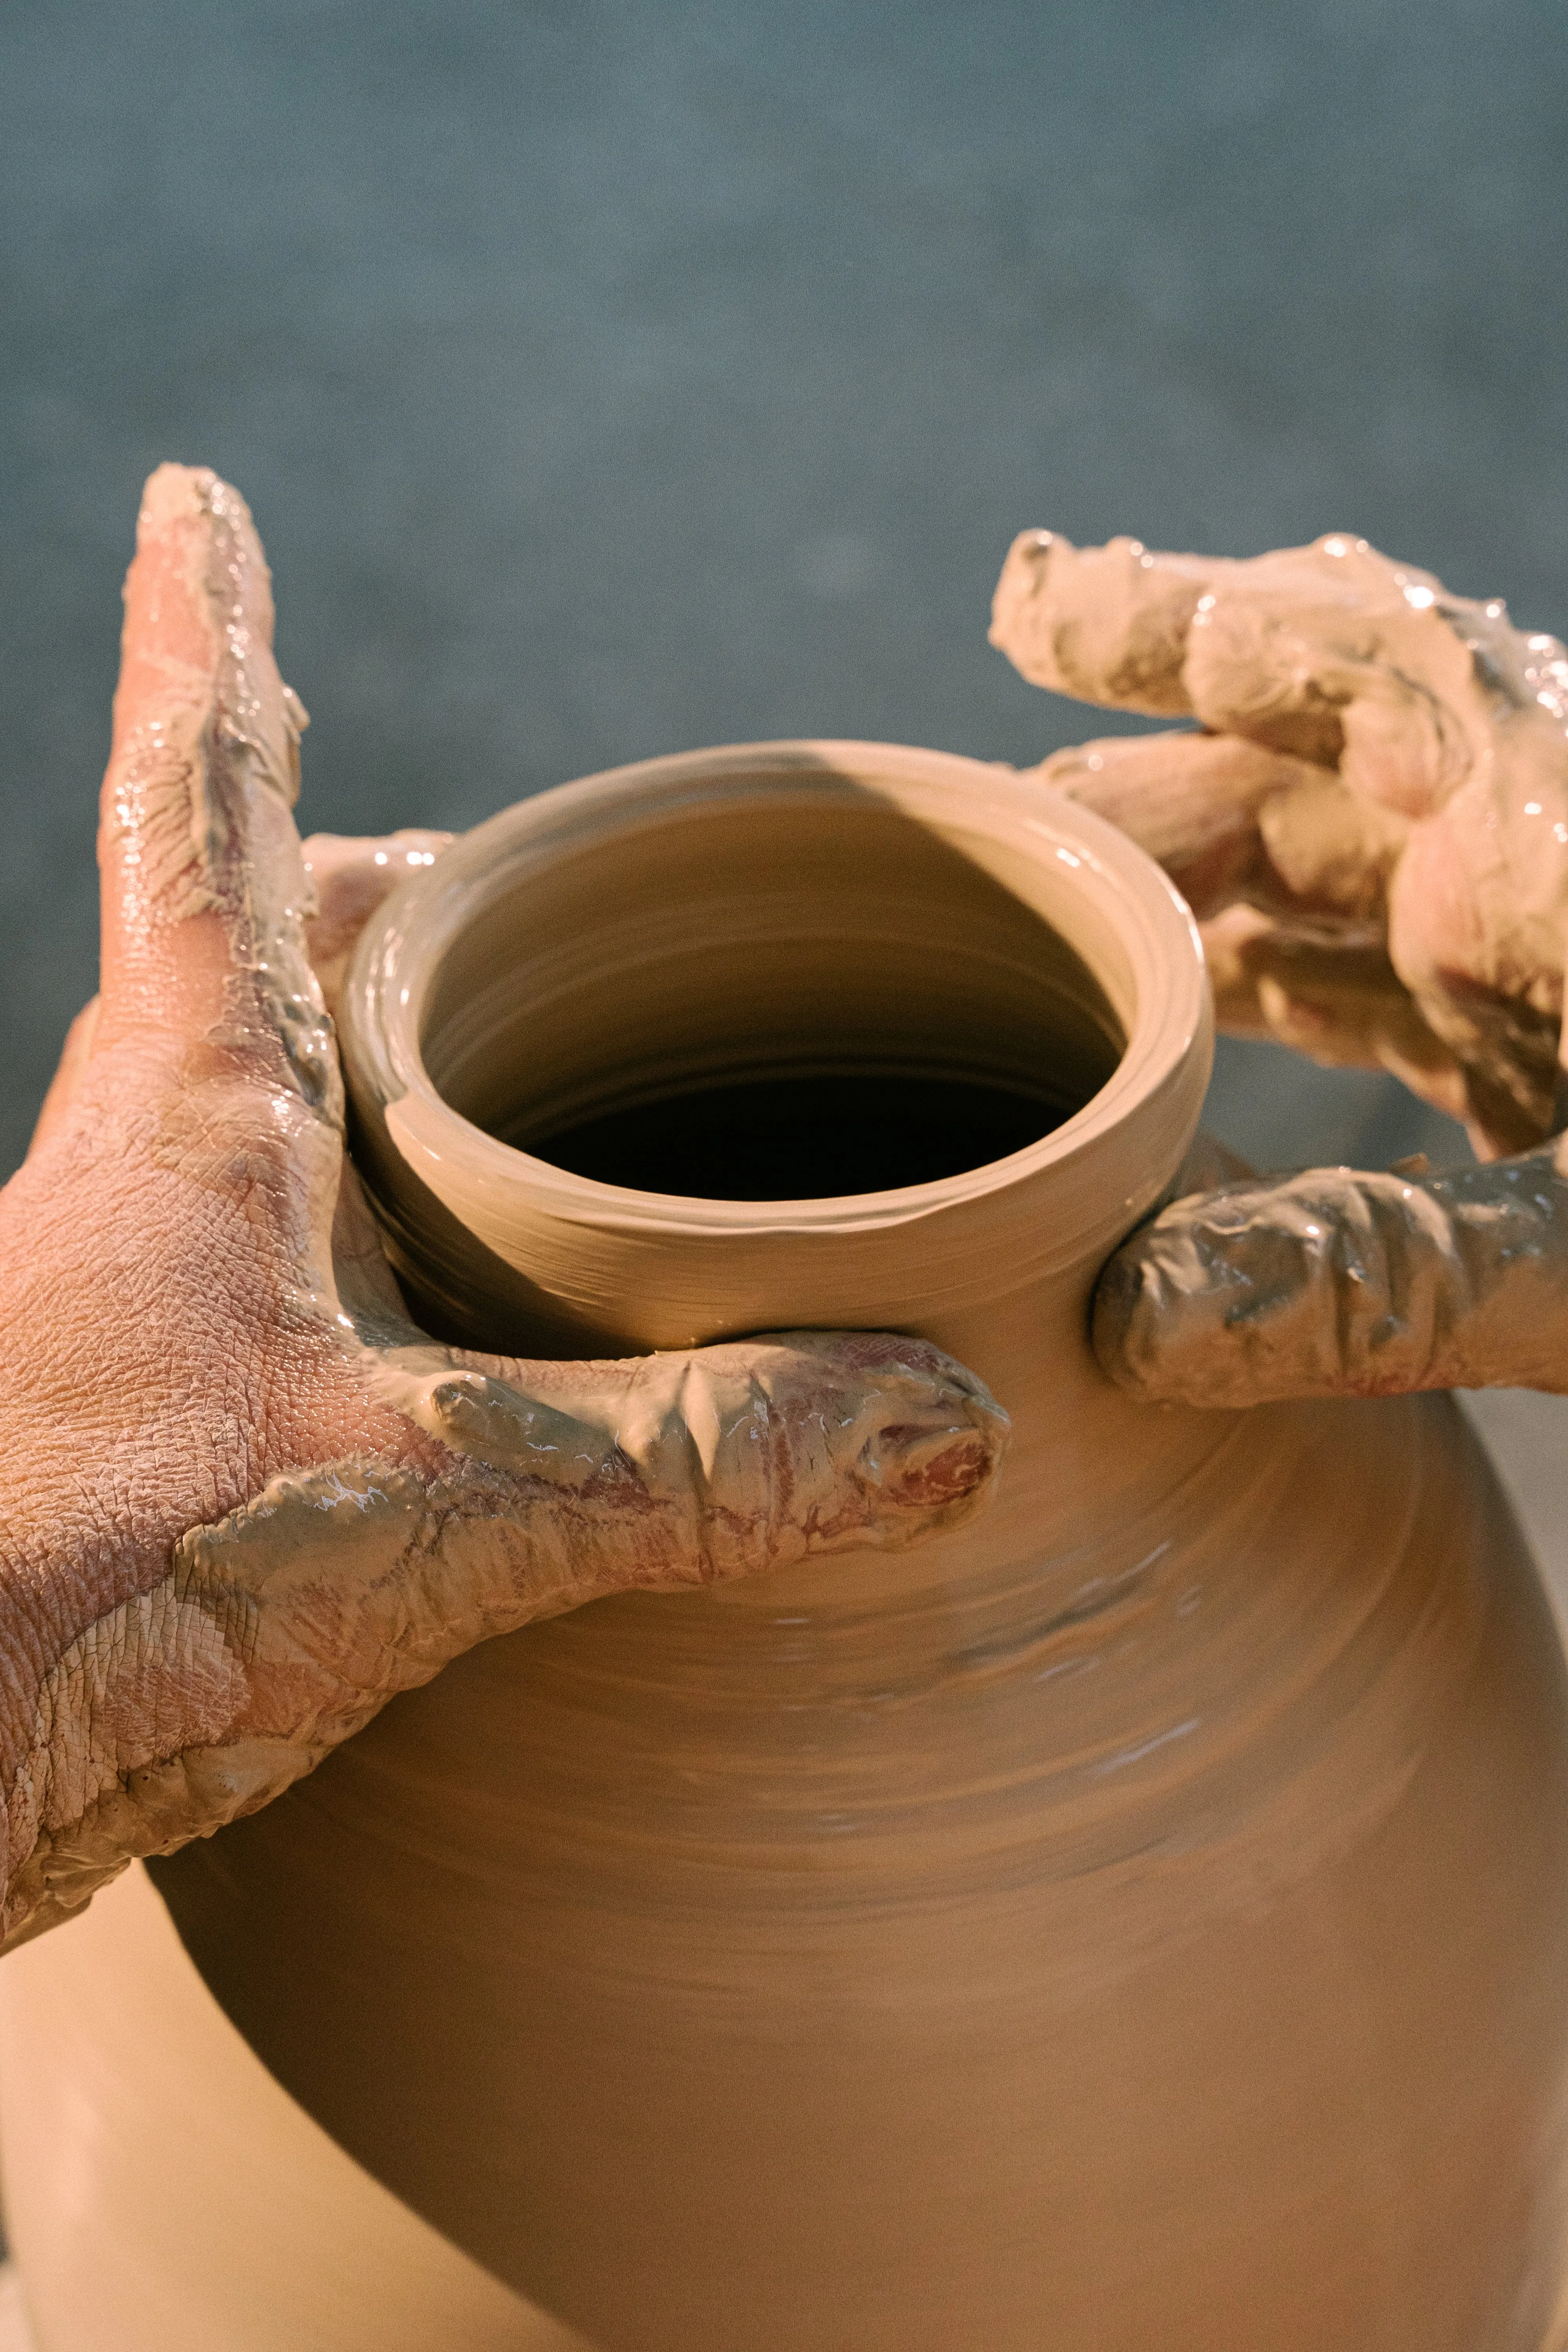 The Art of Pottery: A Therapeutic Creative Outlet